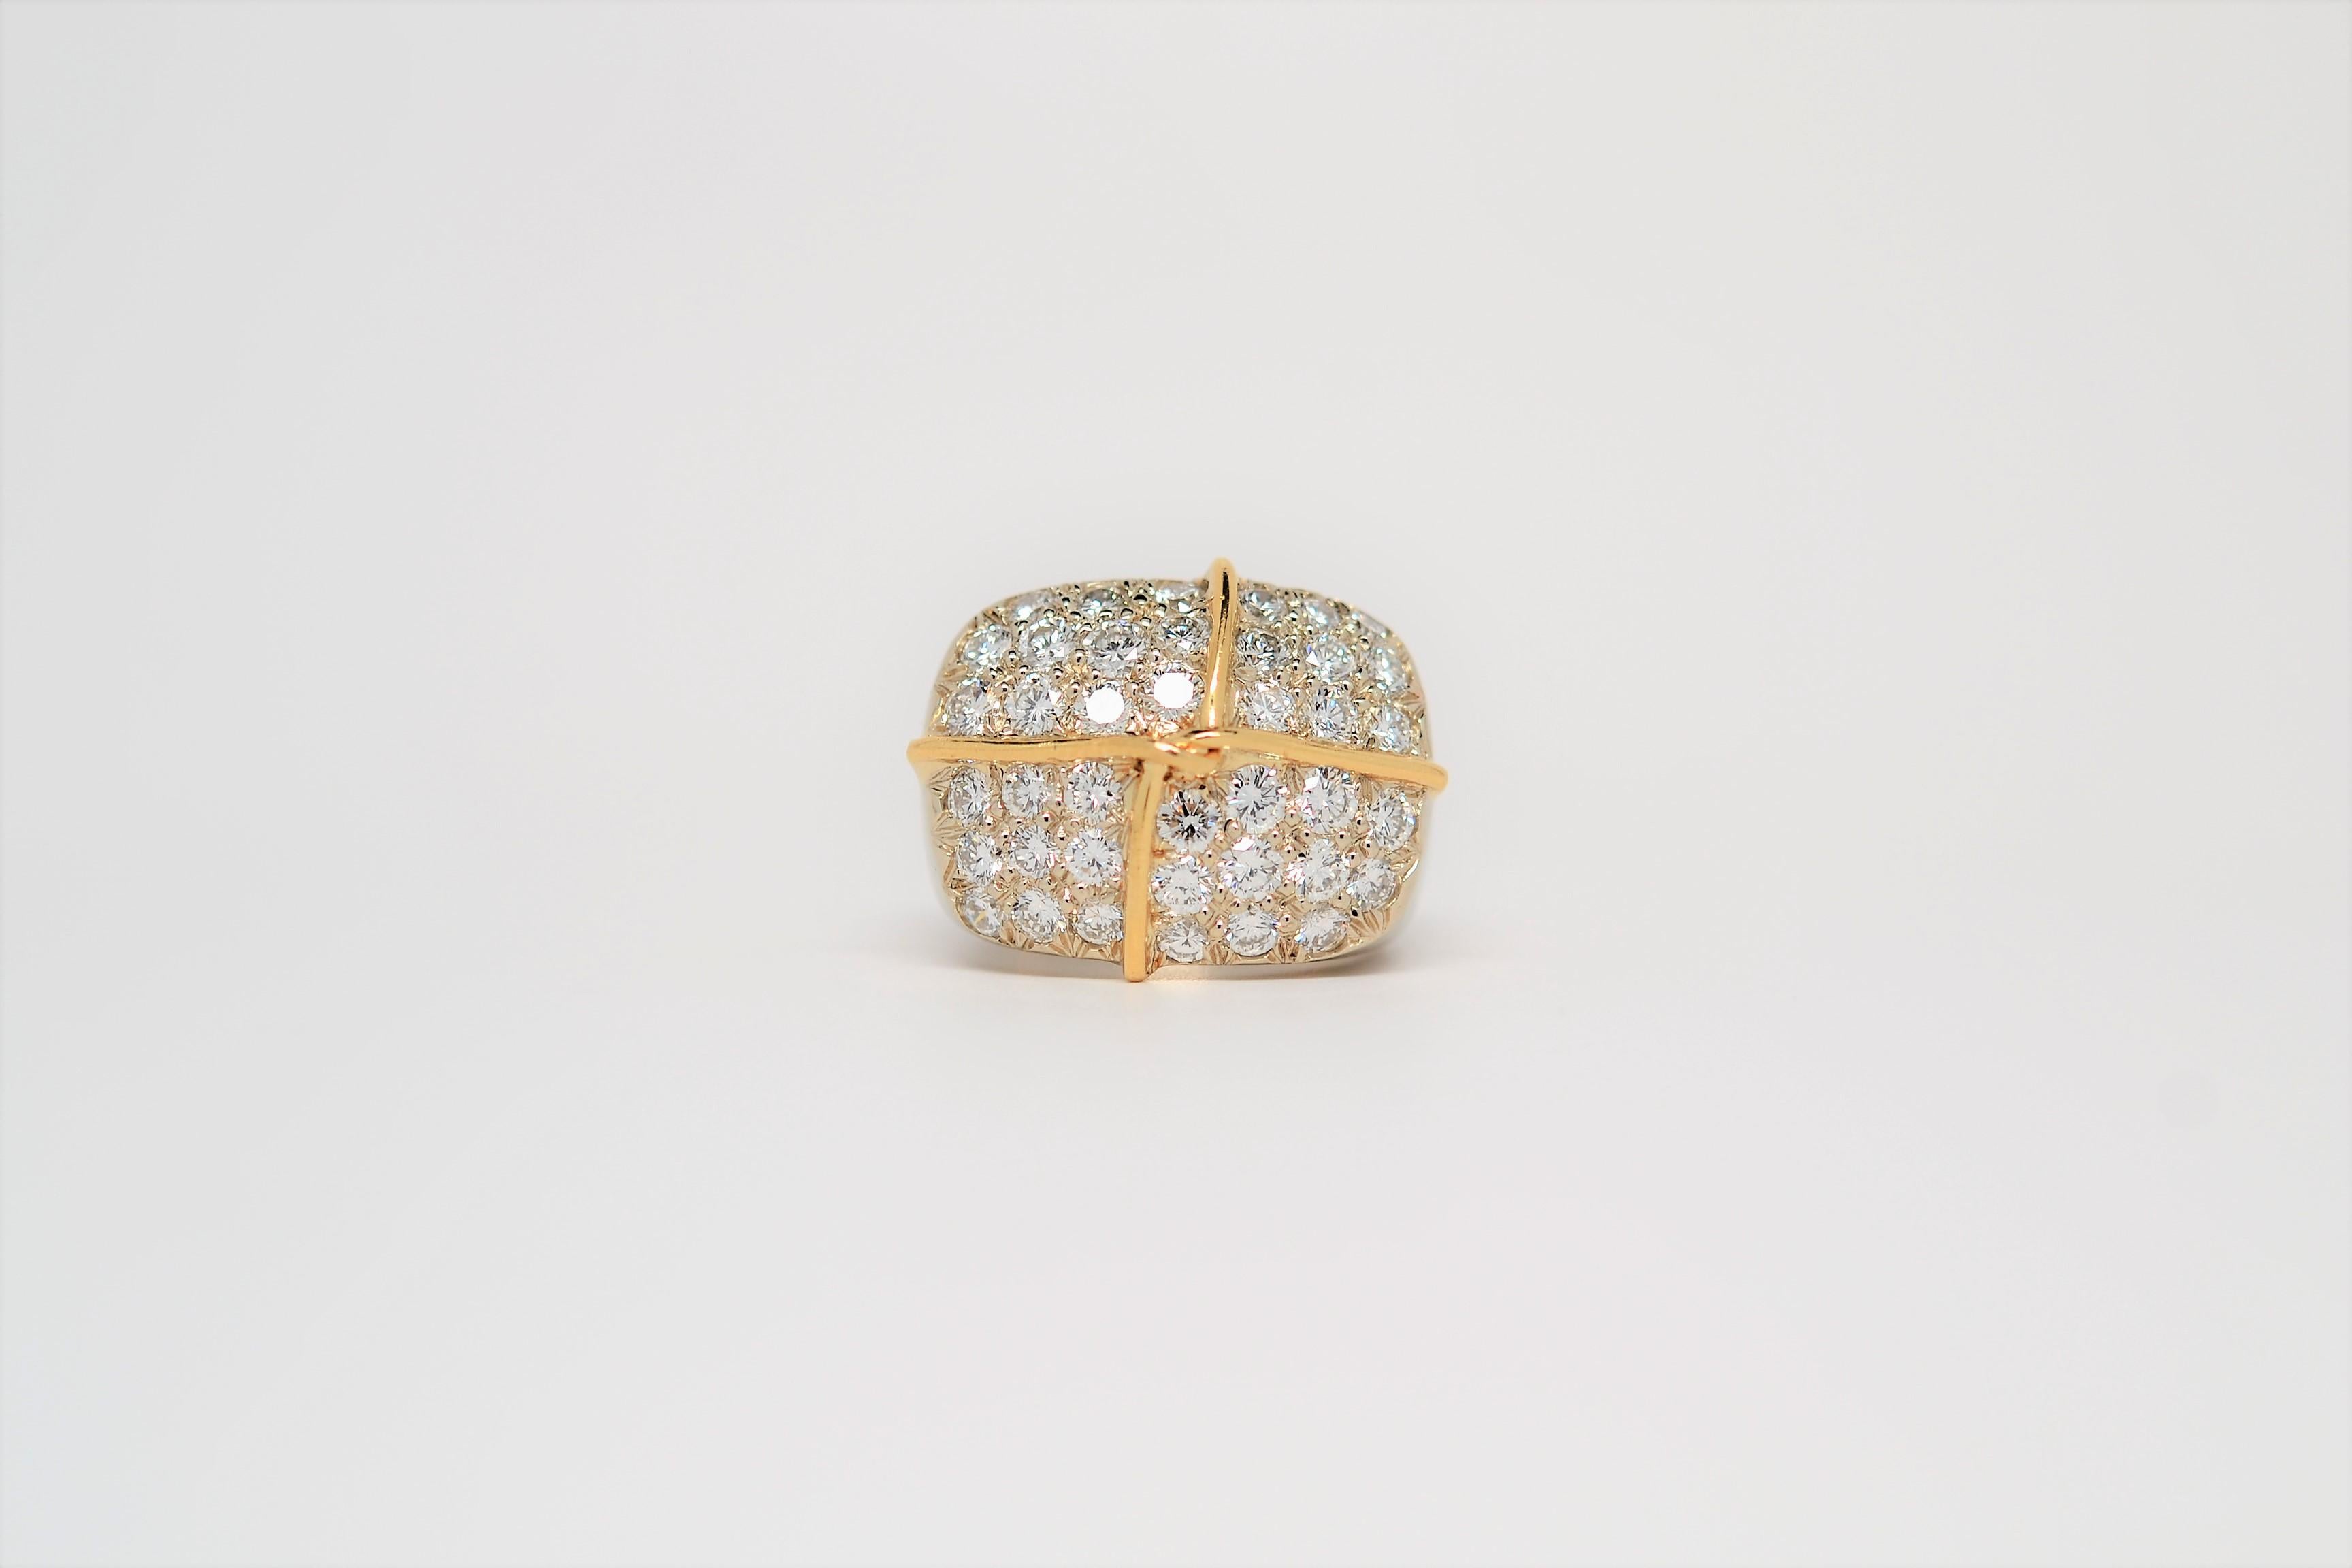 A custom ring made in 18K Two Tone with Yellow & White Gold and a layout of Pavé set Round Brilliant Cut Diamonds. 
Forty Round Brilliant Cut Diamonds weigh 2.64ct, diamond color grade range is F to G and clarity grade range is VS-1 to VS-2.
The